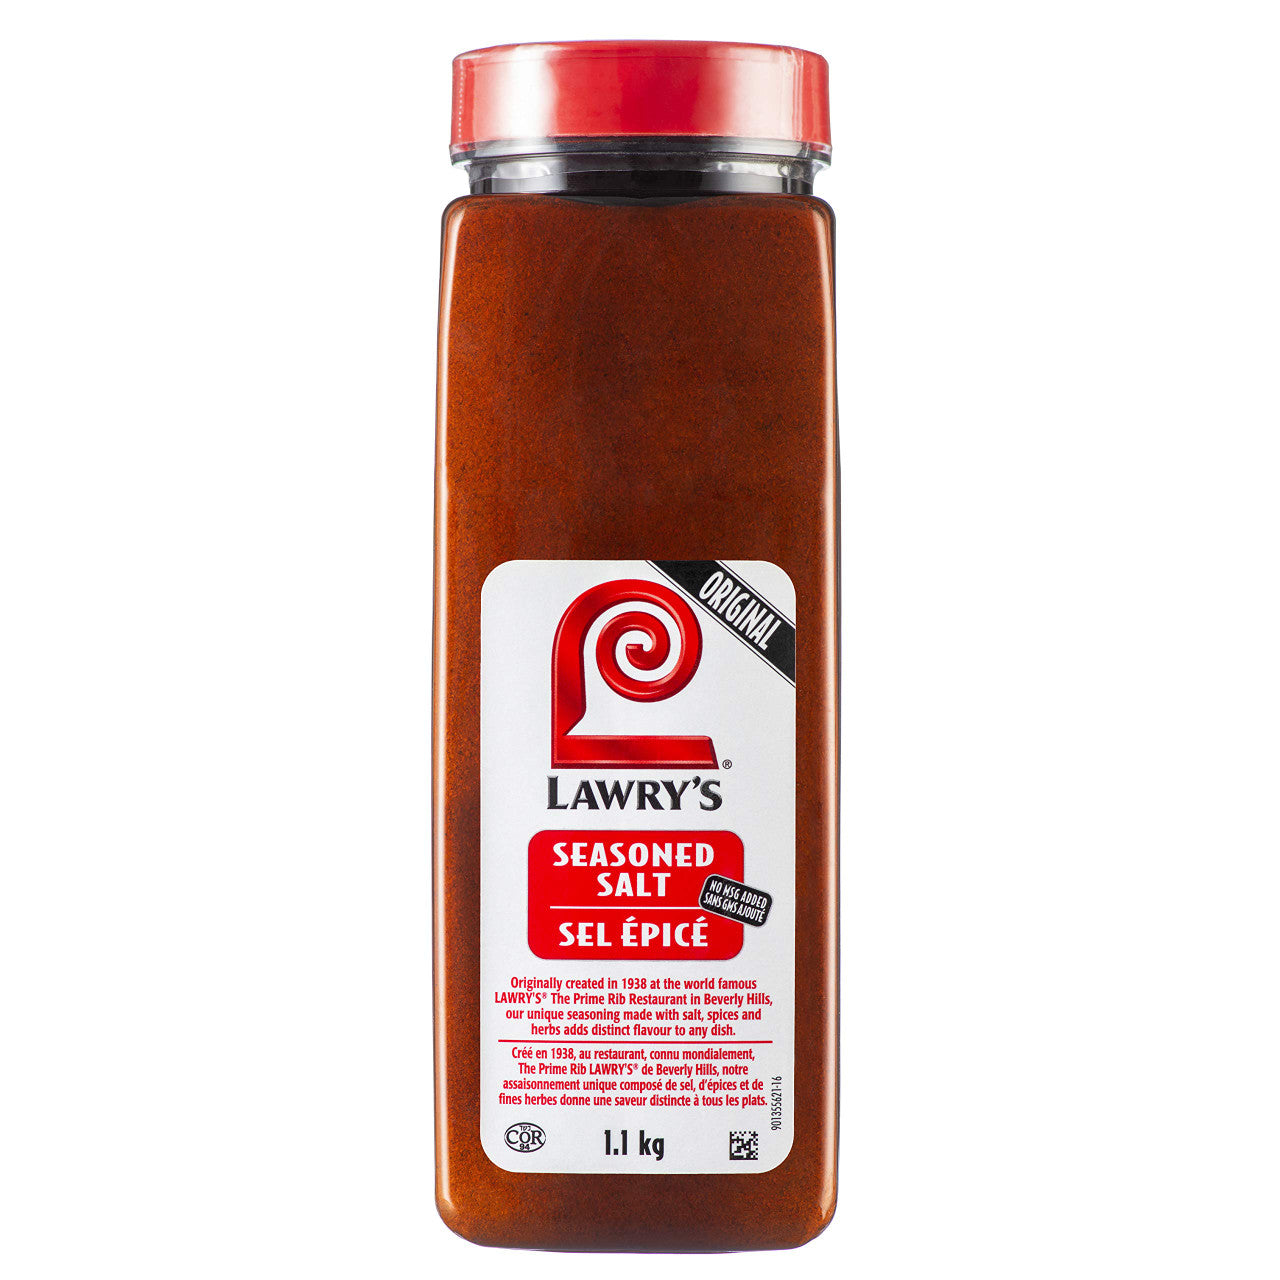 Lawry's, The Original Seasoned Salt, 1.1kg/2.4lbs, Imported from Canada}